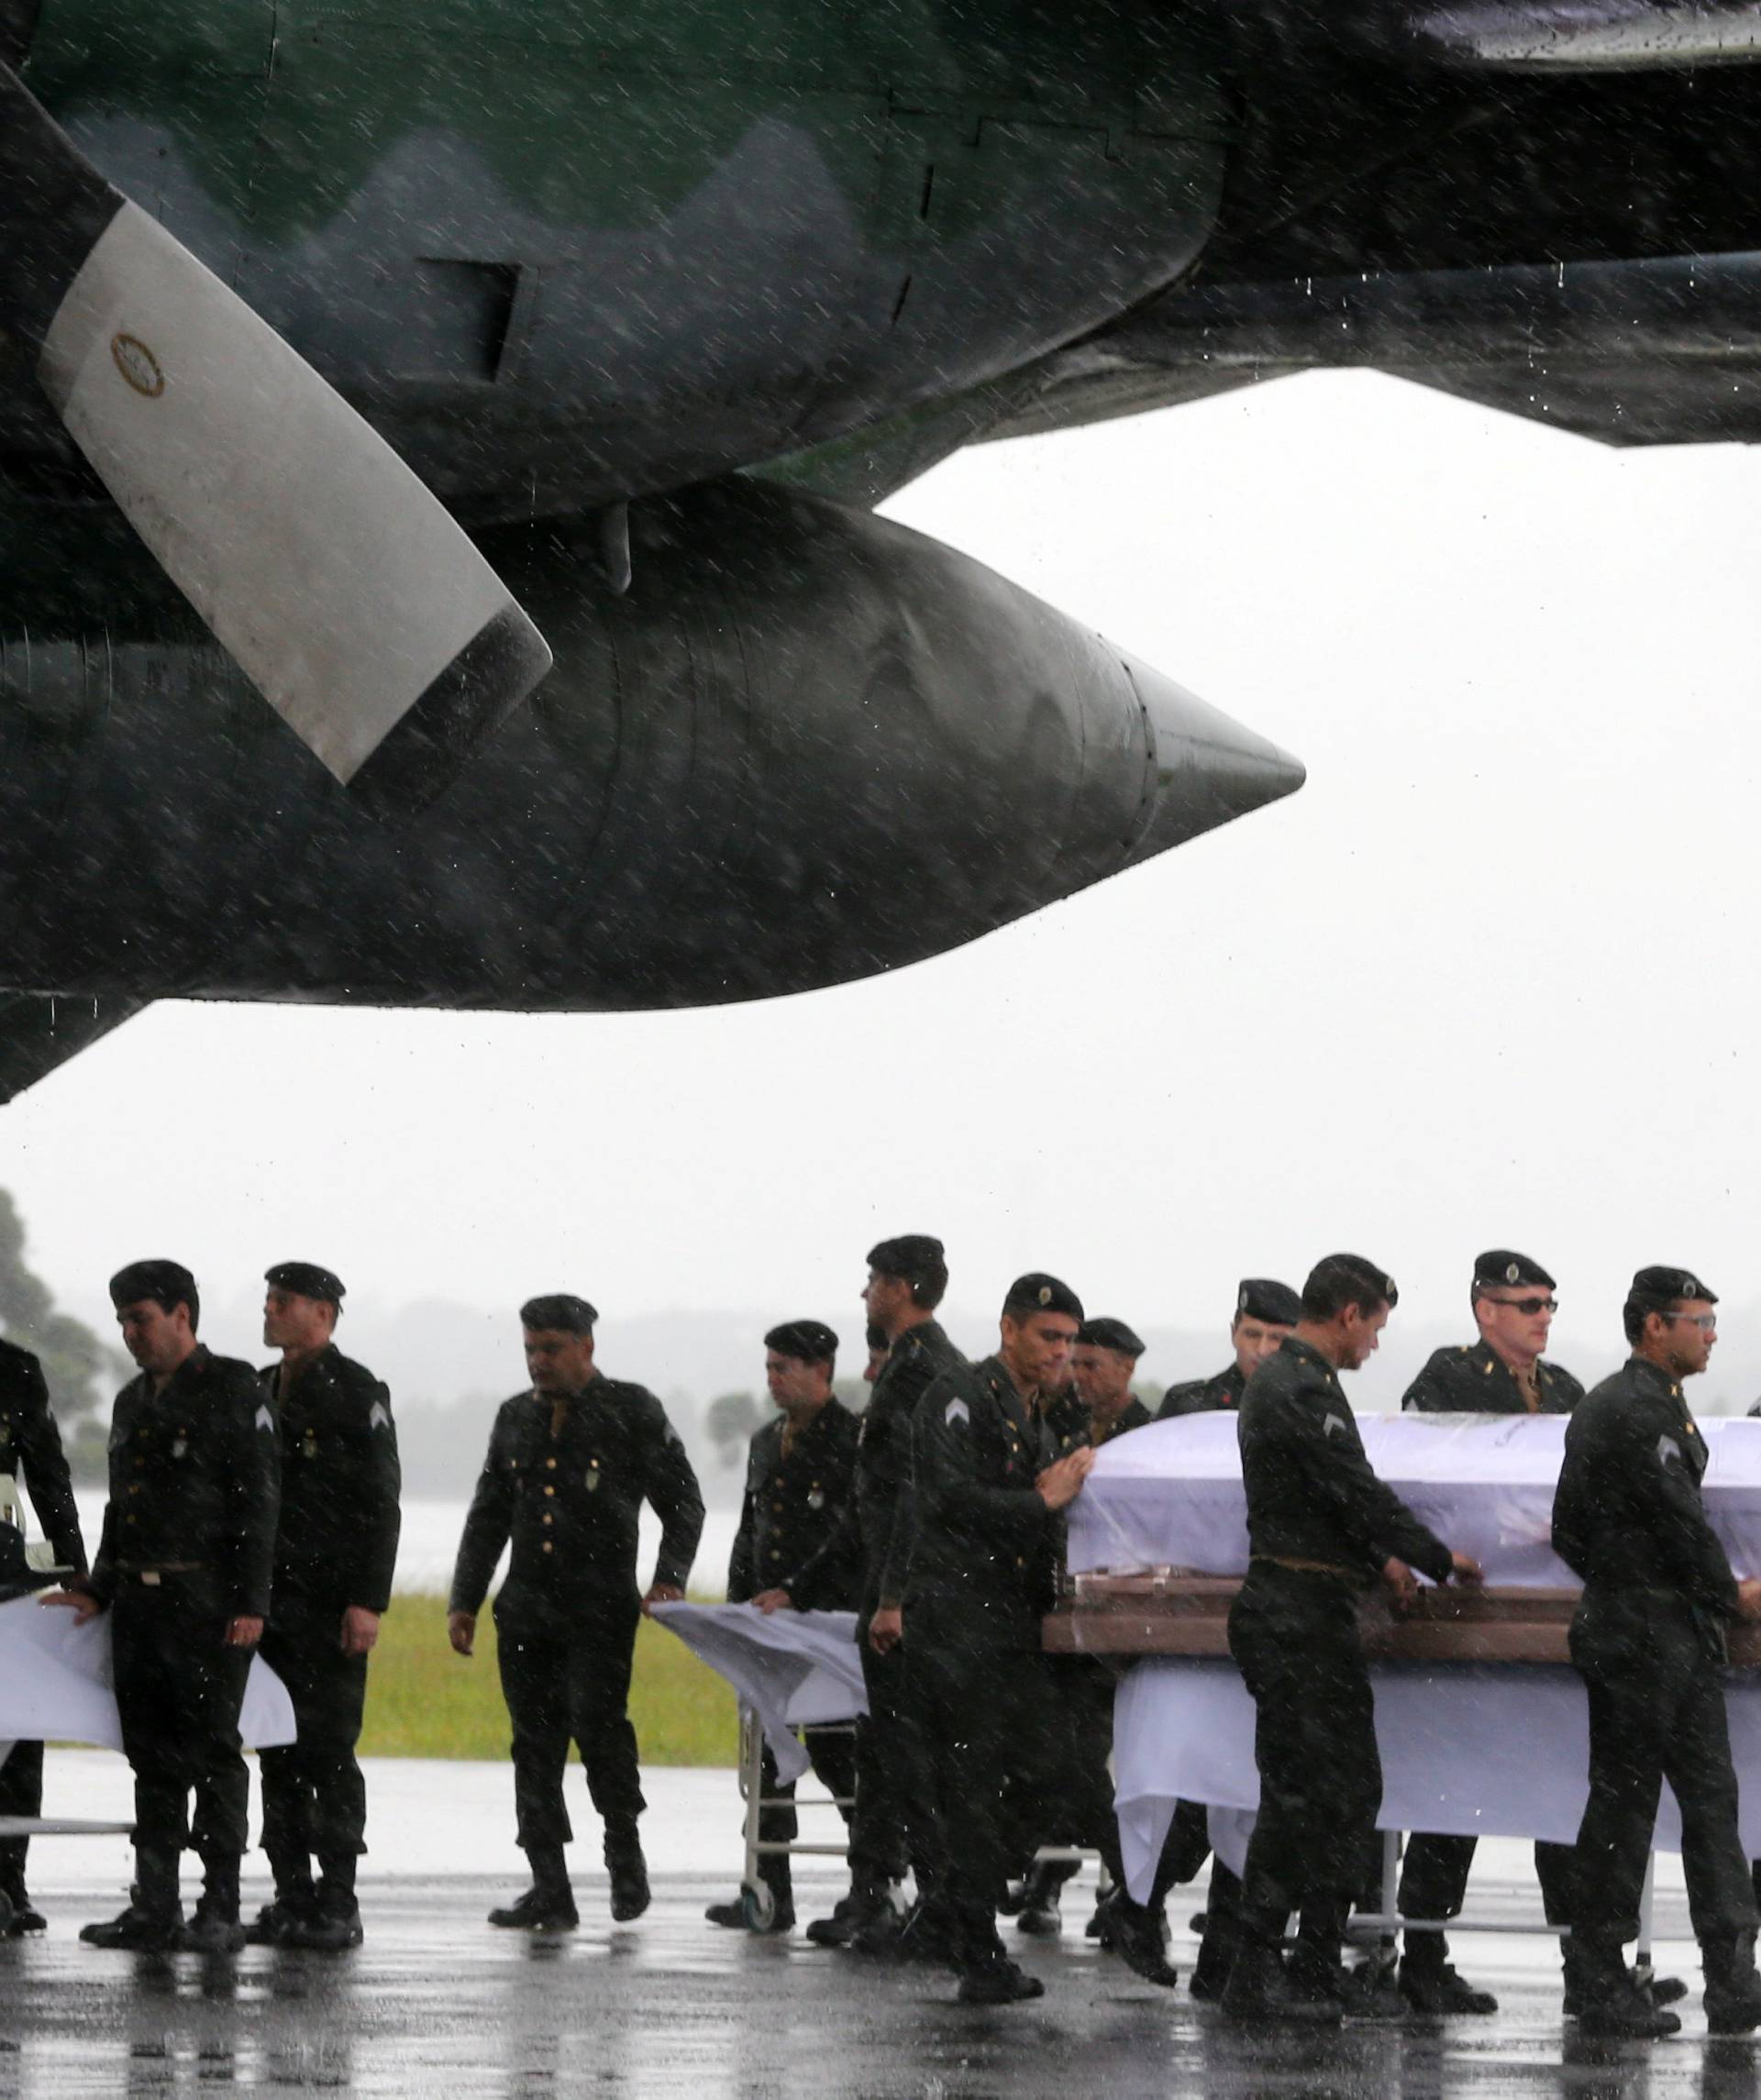 Coffins containing the mortal remains of the victims of the plane crash in Colombia arrive in Chapeco